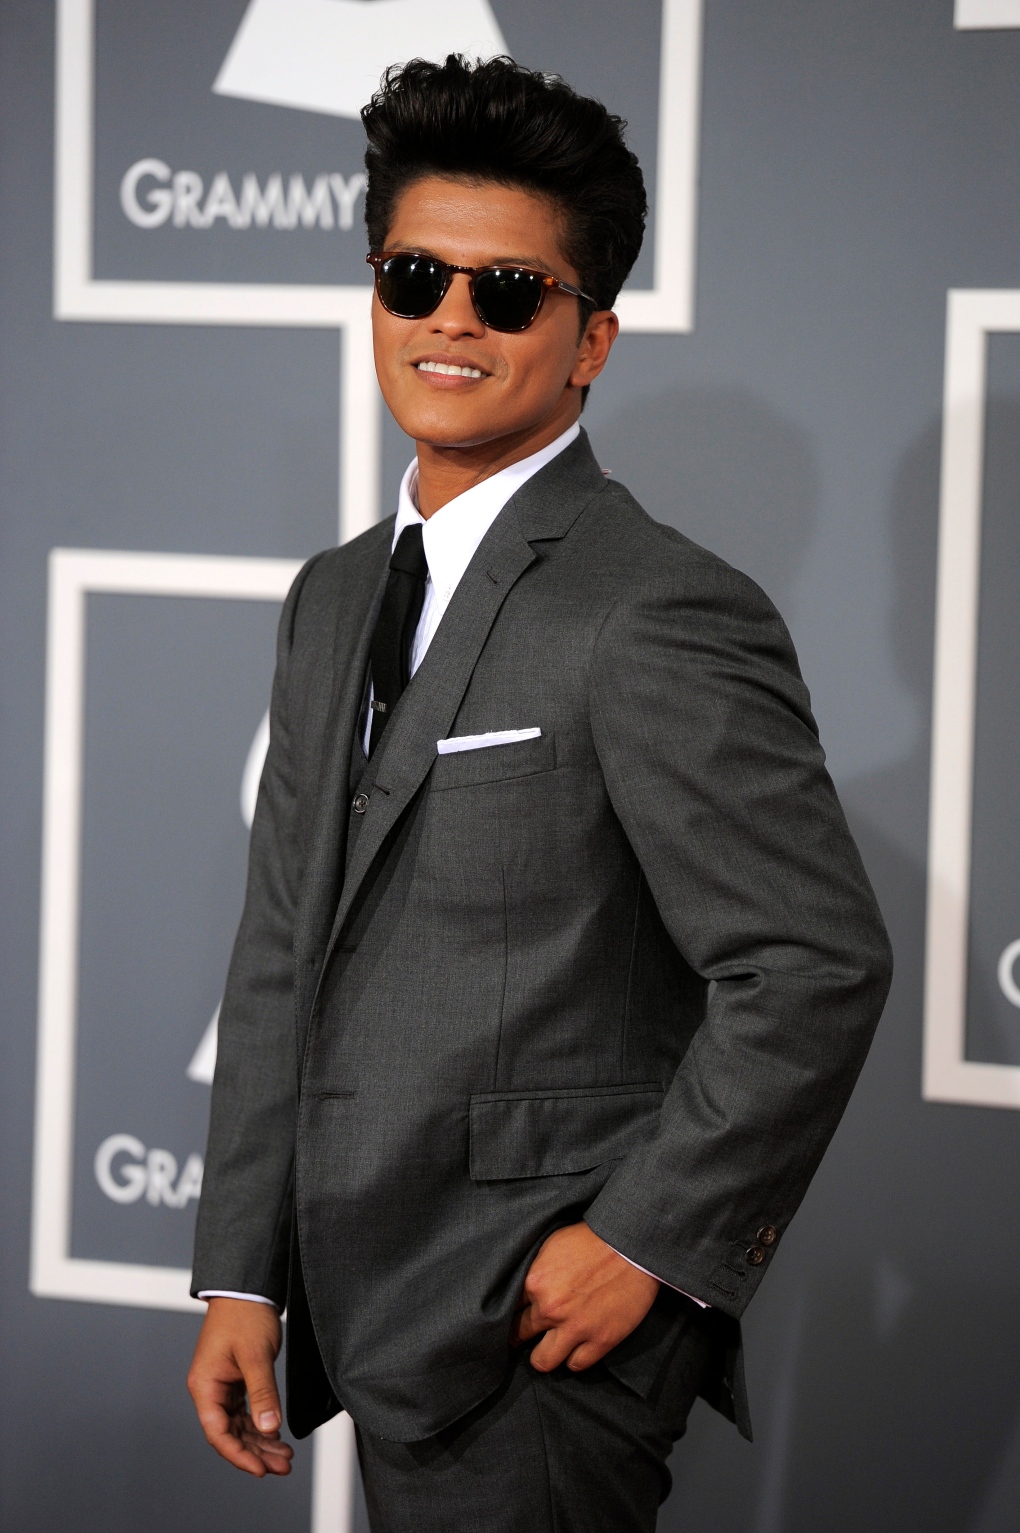 Bruno Mars thanks fans for support after mother's death